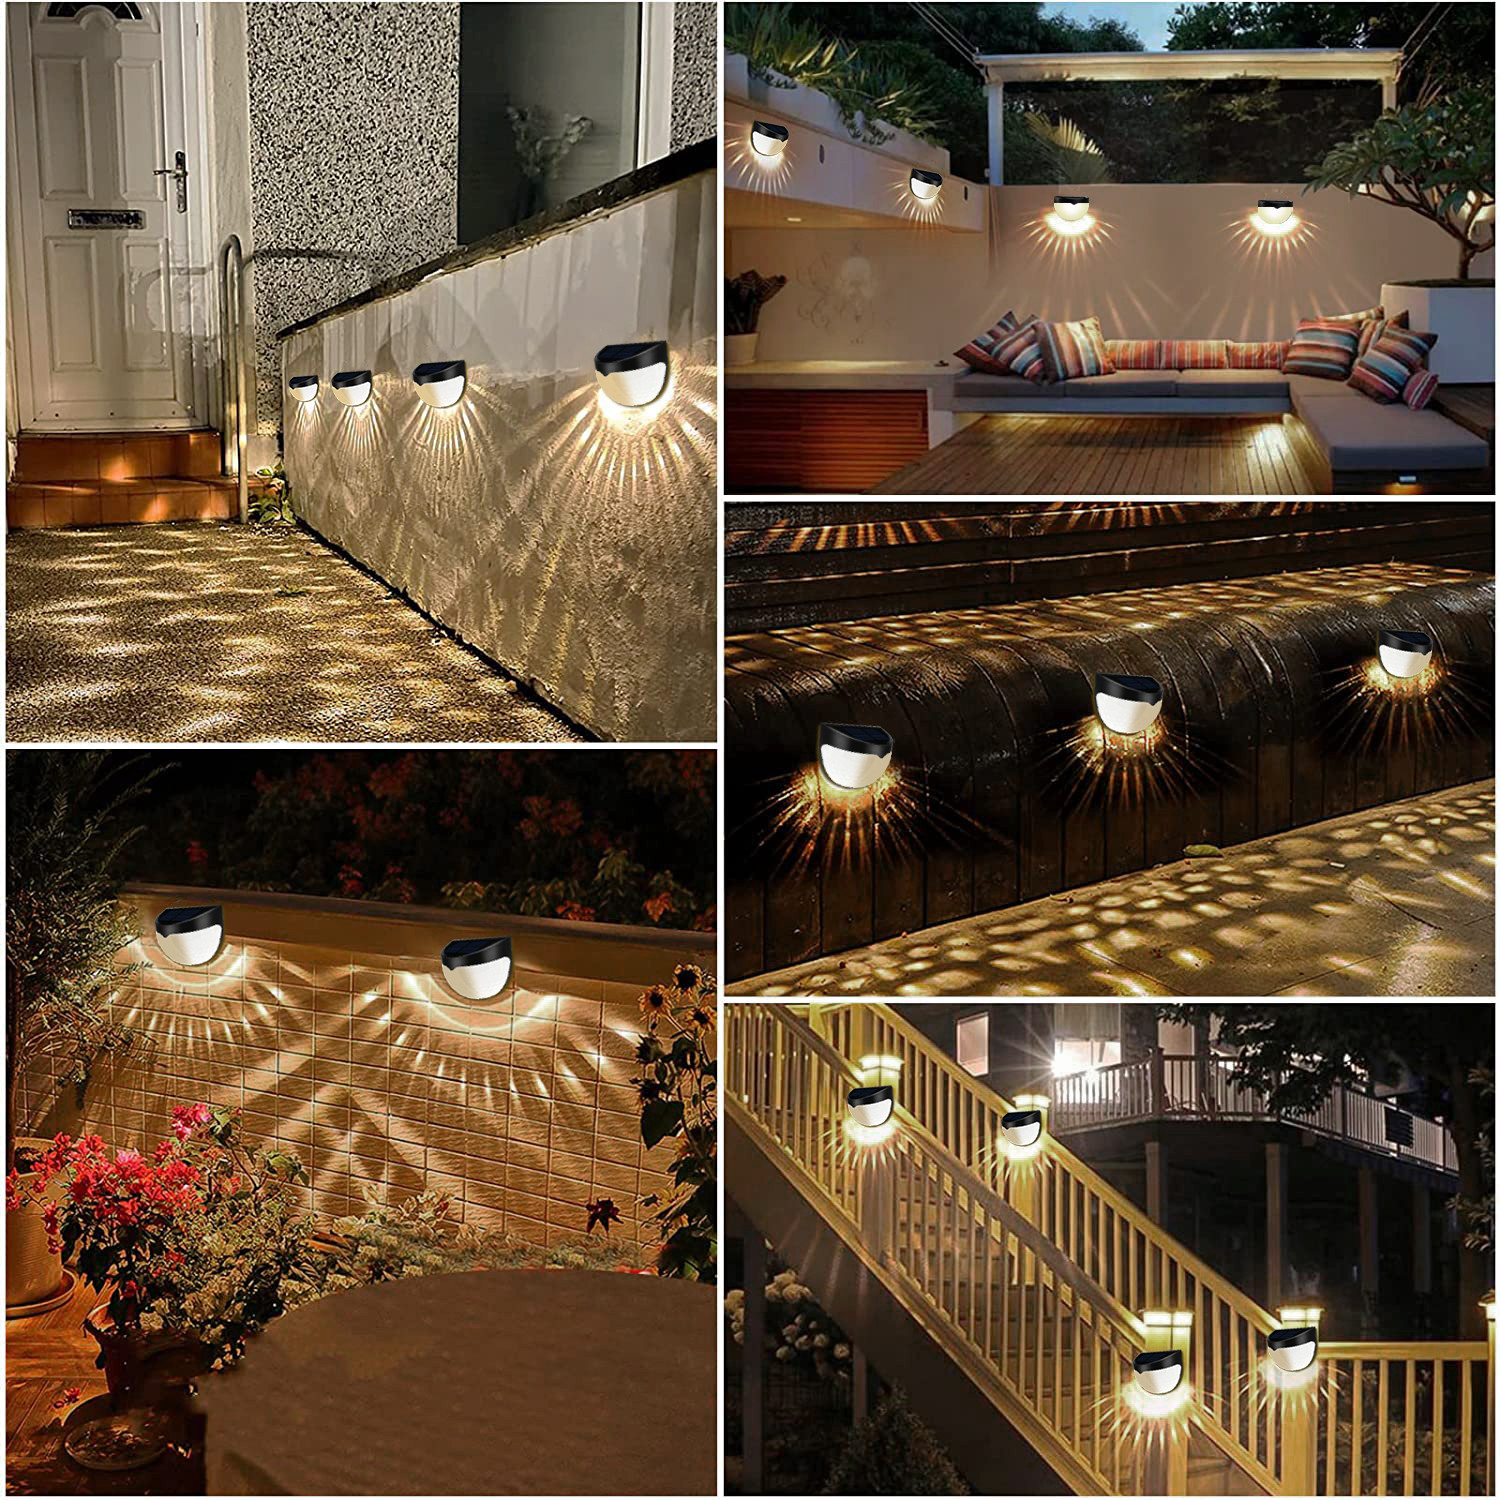 Elegant Choise Solar Wall Lights 6LED IP65 Waterproof Deck Lamps for Garden Fence Yard, 2 Pack - image 2 of 12